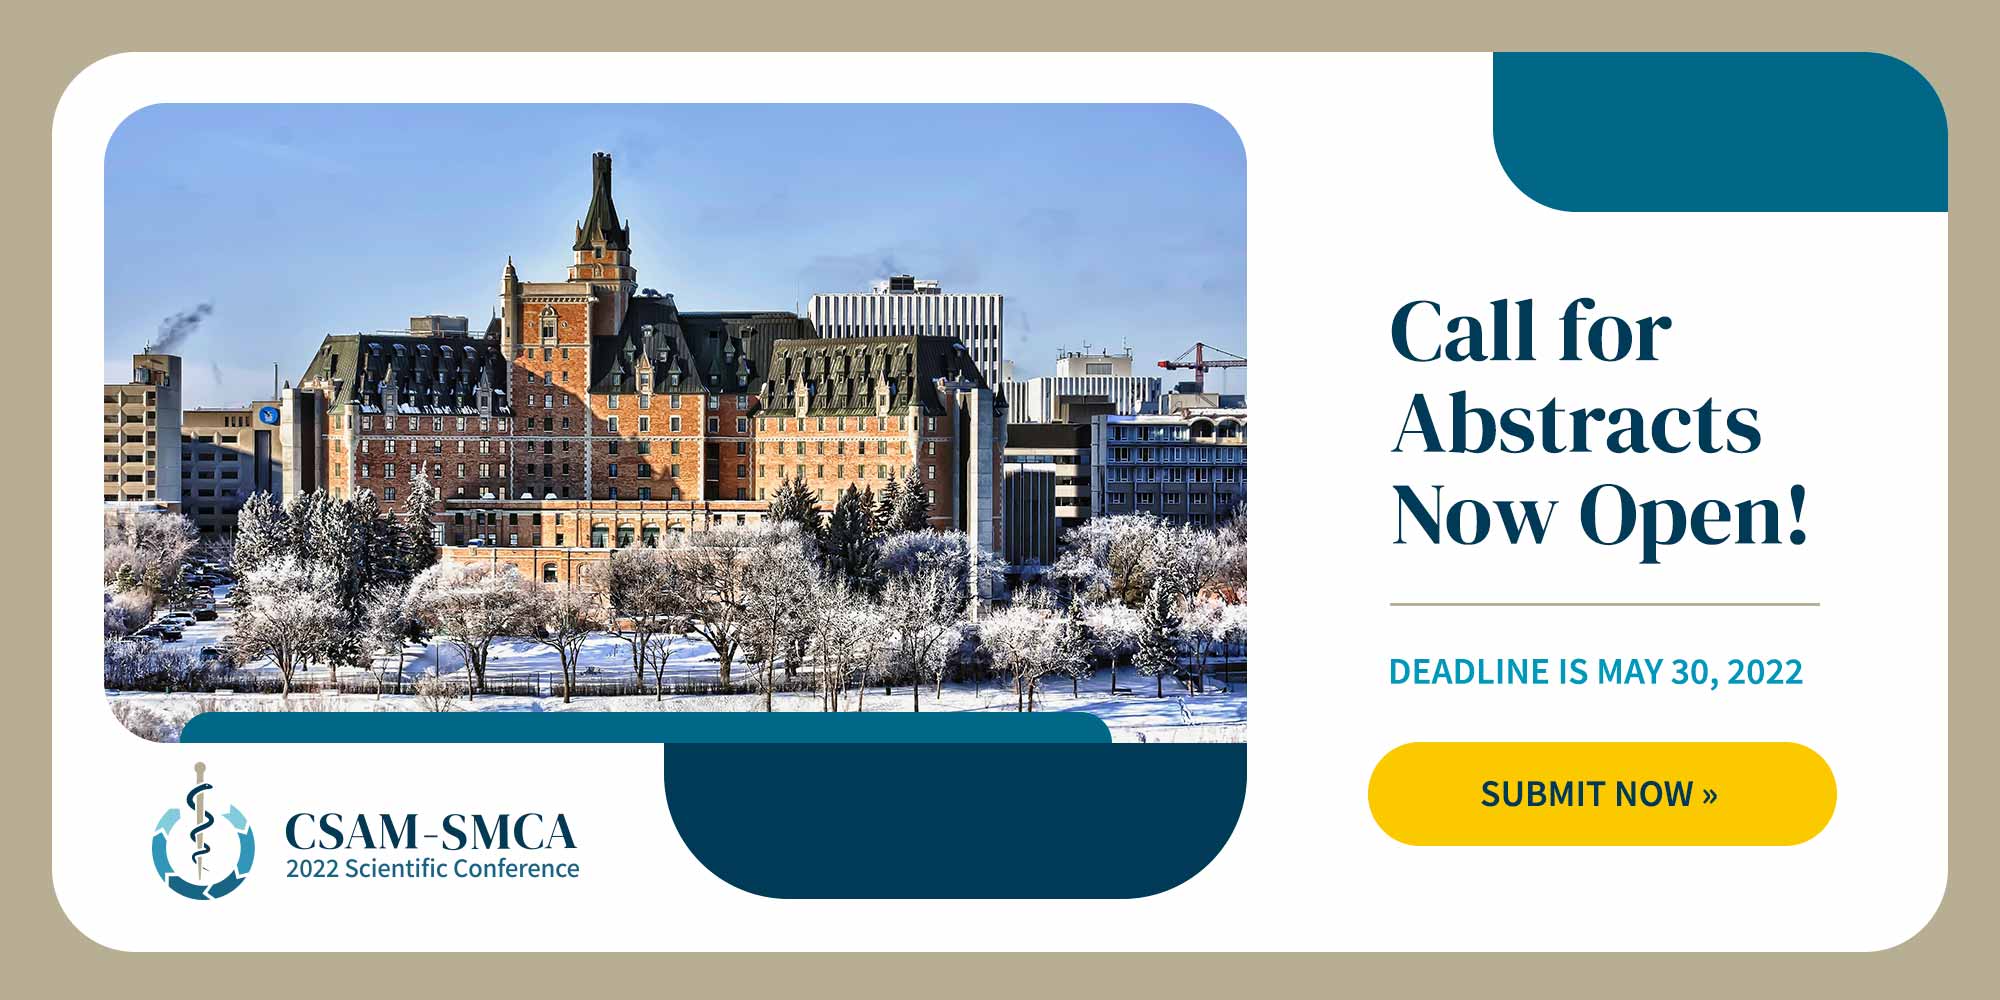 CSAM-SMCA 2022 Conference call for abstracts